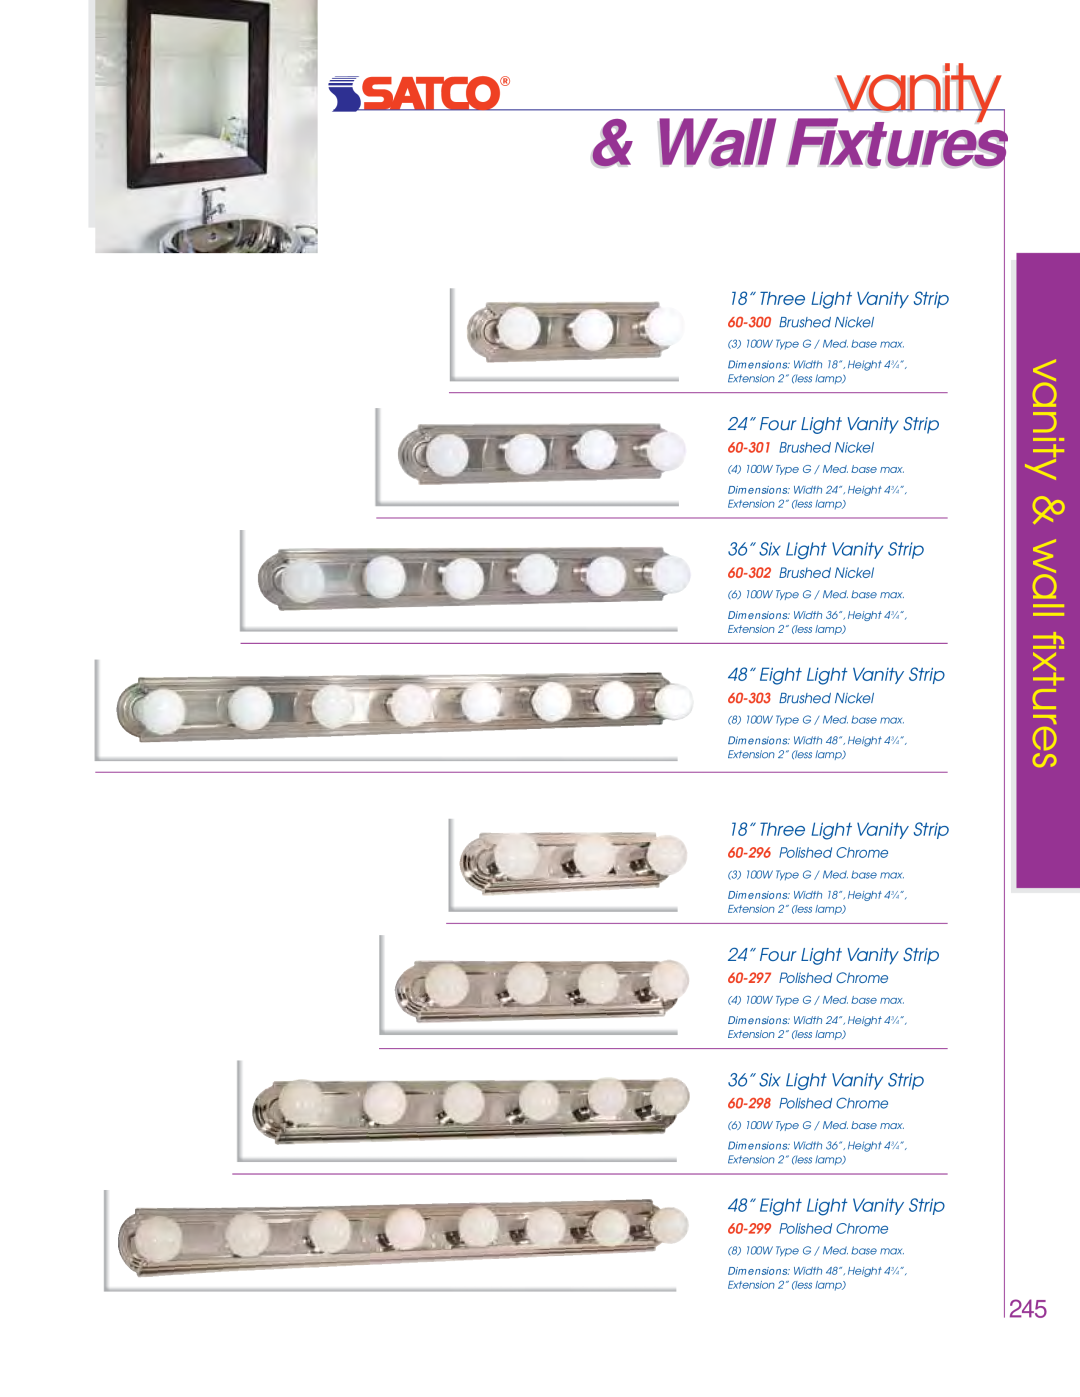 Satco Products 76-445, 76-693, 76-694, 76-695 Wall Fixtures, Brushed Nickel, Polished Chrome, vanity & wall fixtures 